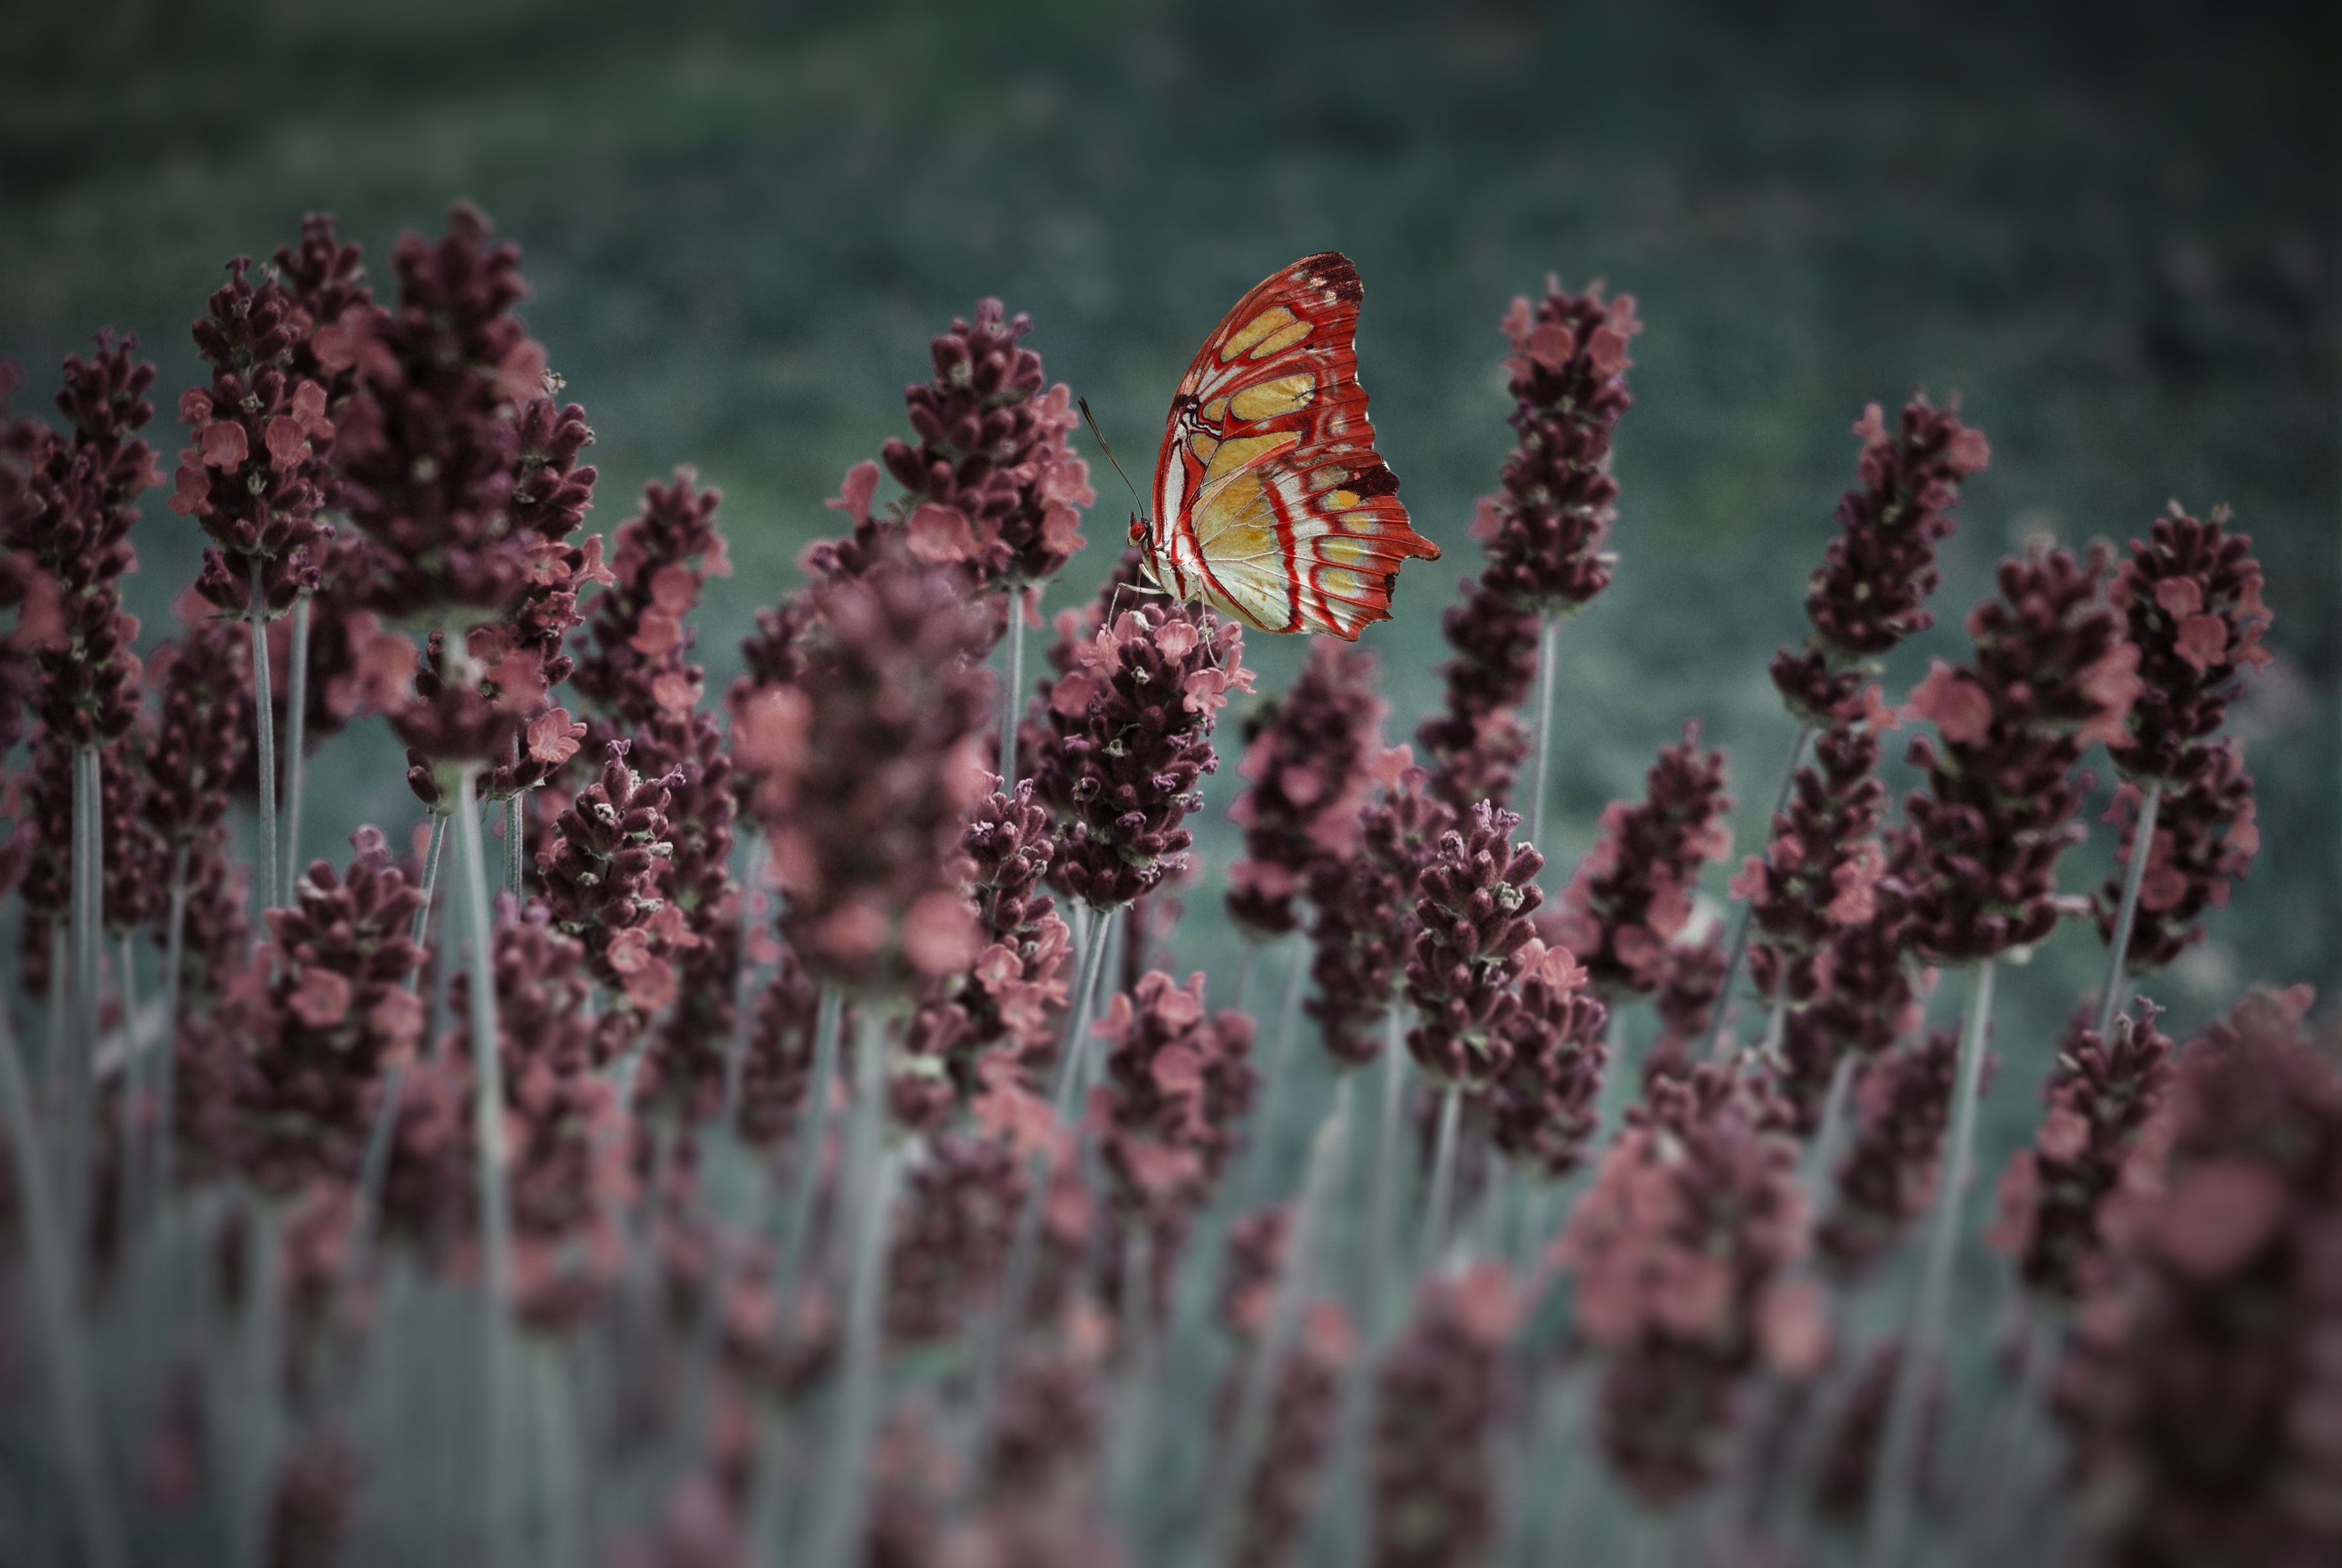 Red and Yellow Butterfly, Aromatic, Garden, Plants, Outdoors, HQ Photo